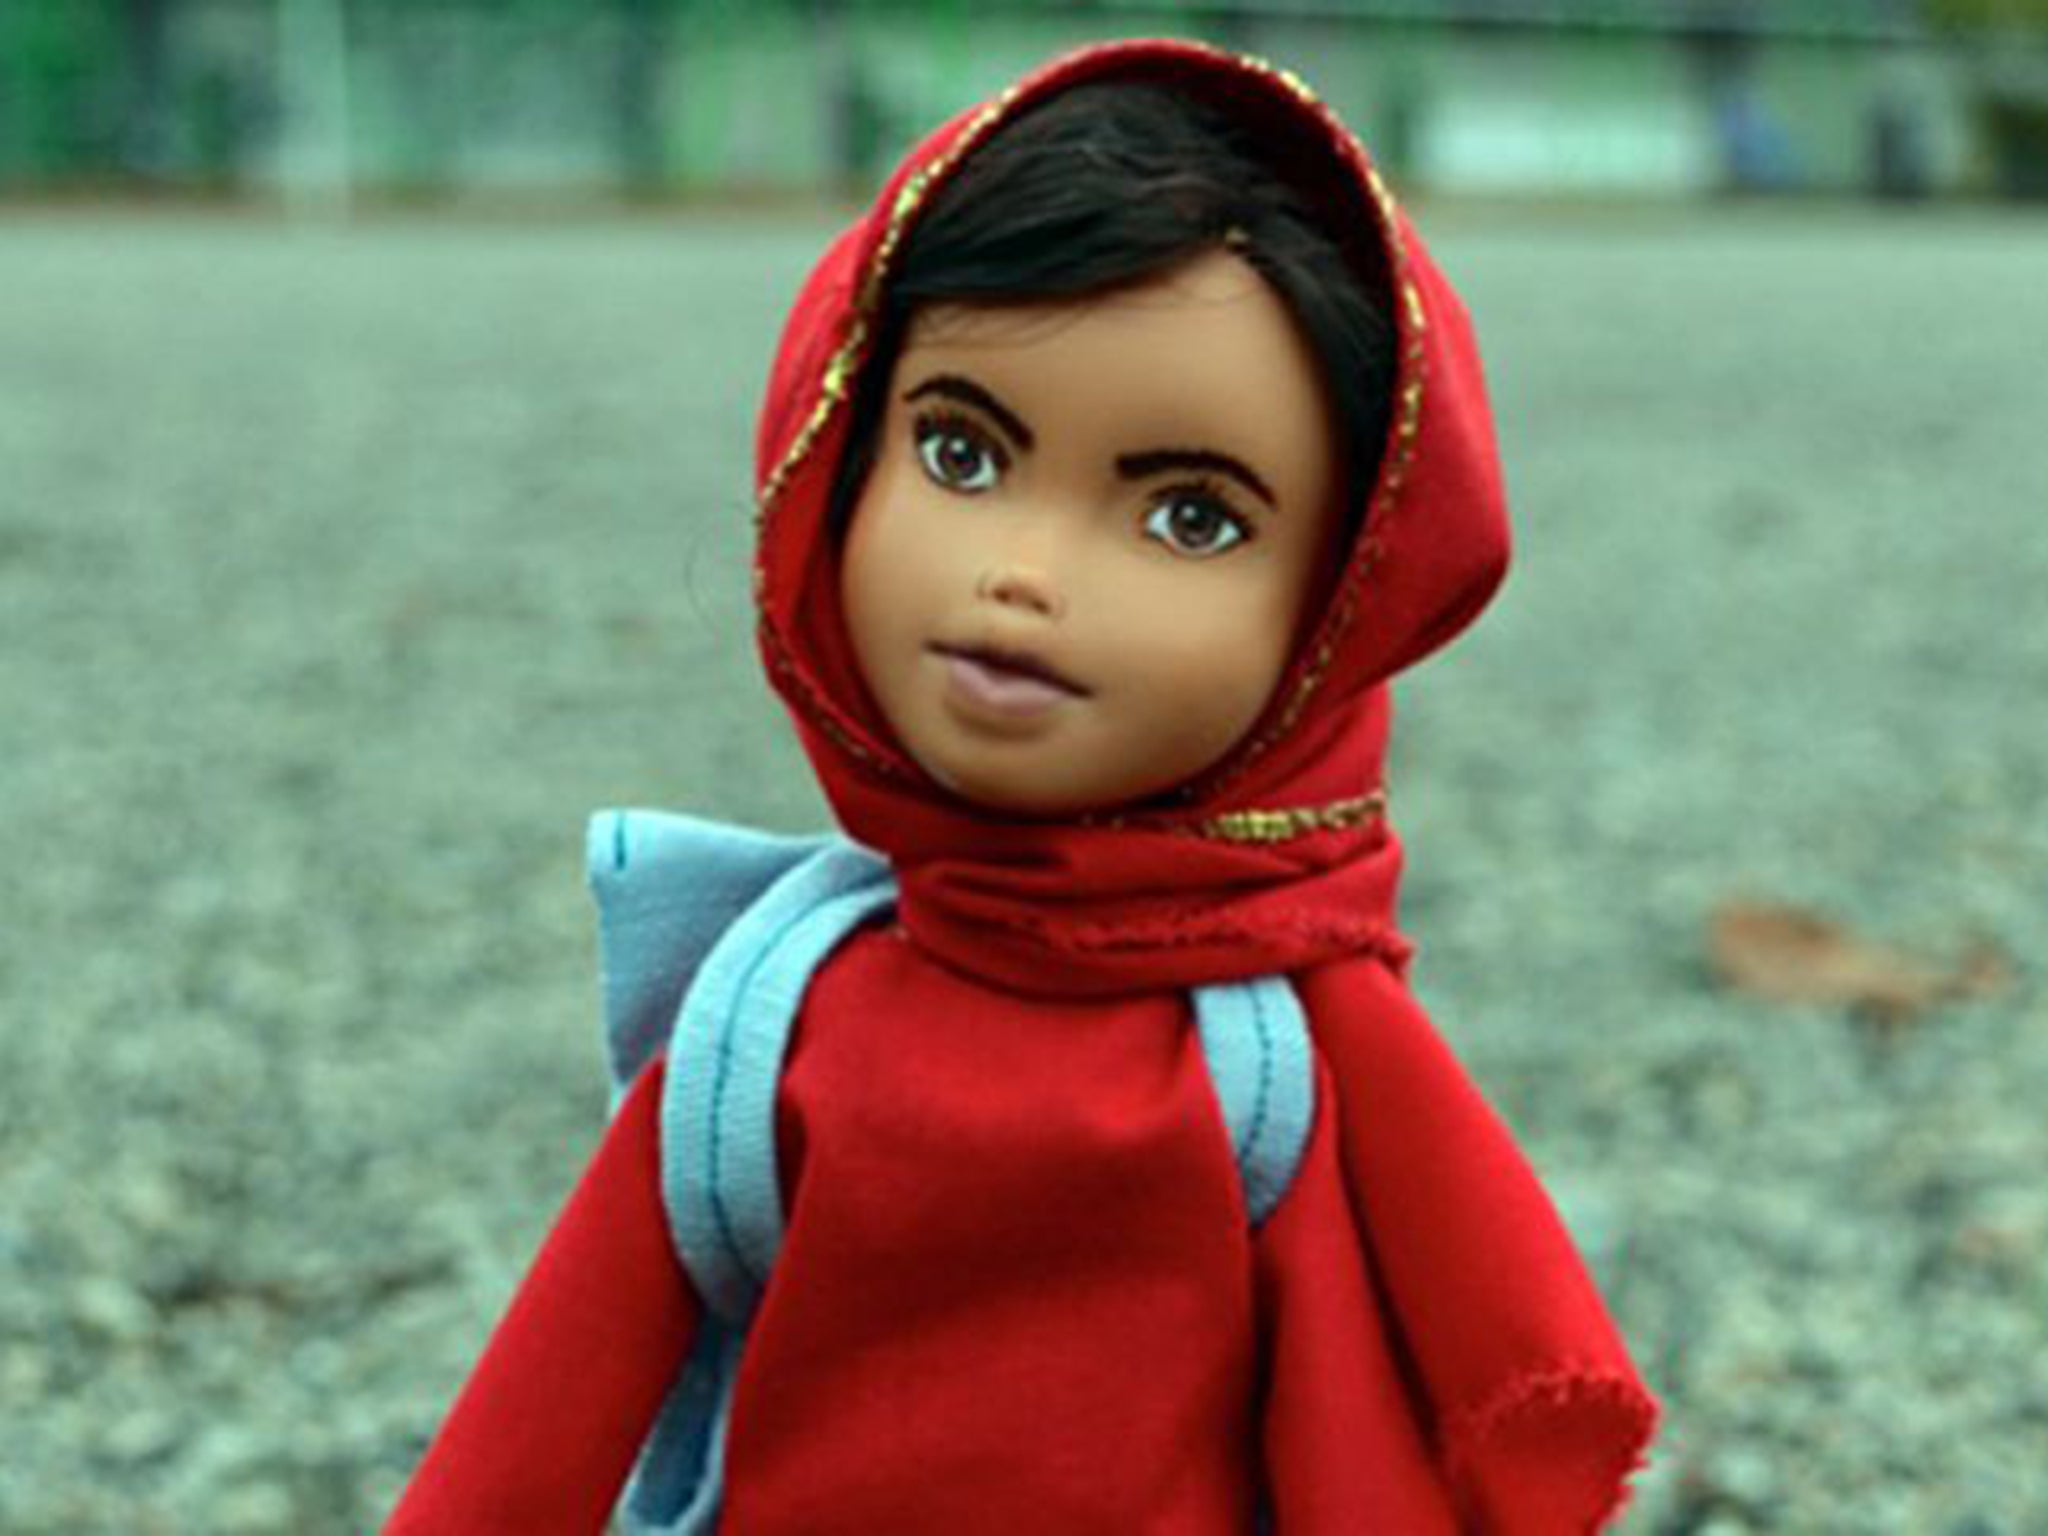 Artist Wendy Tsao has turned Bratz dolls into what she calls “Mighty Dolls”, figures modelled on inspirational women such as Malala Yousafzai, pictured